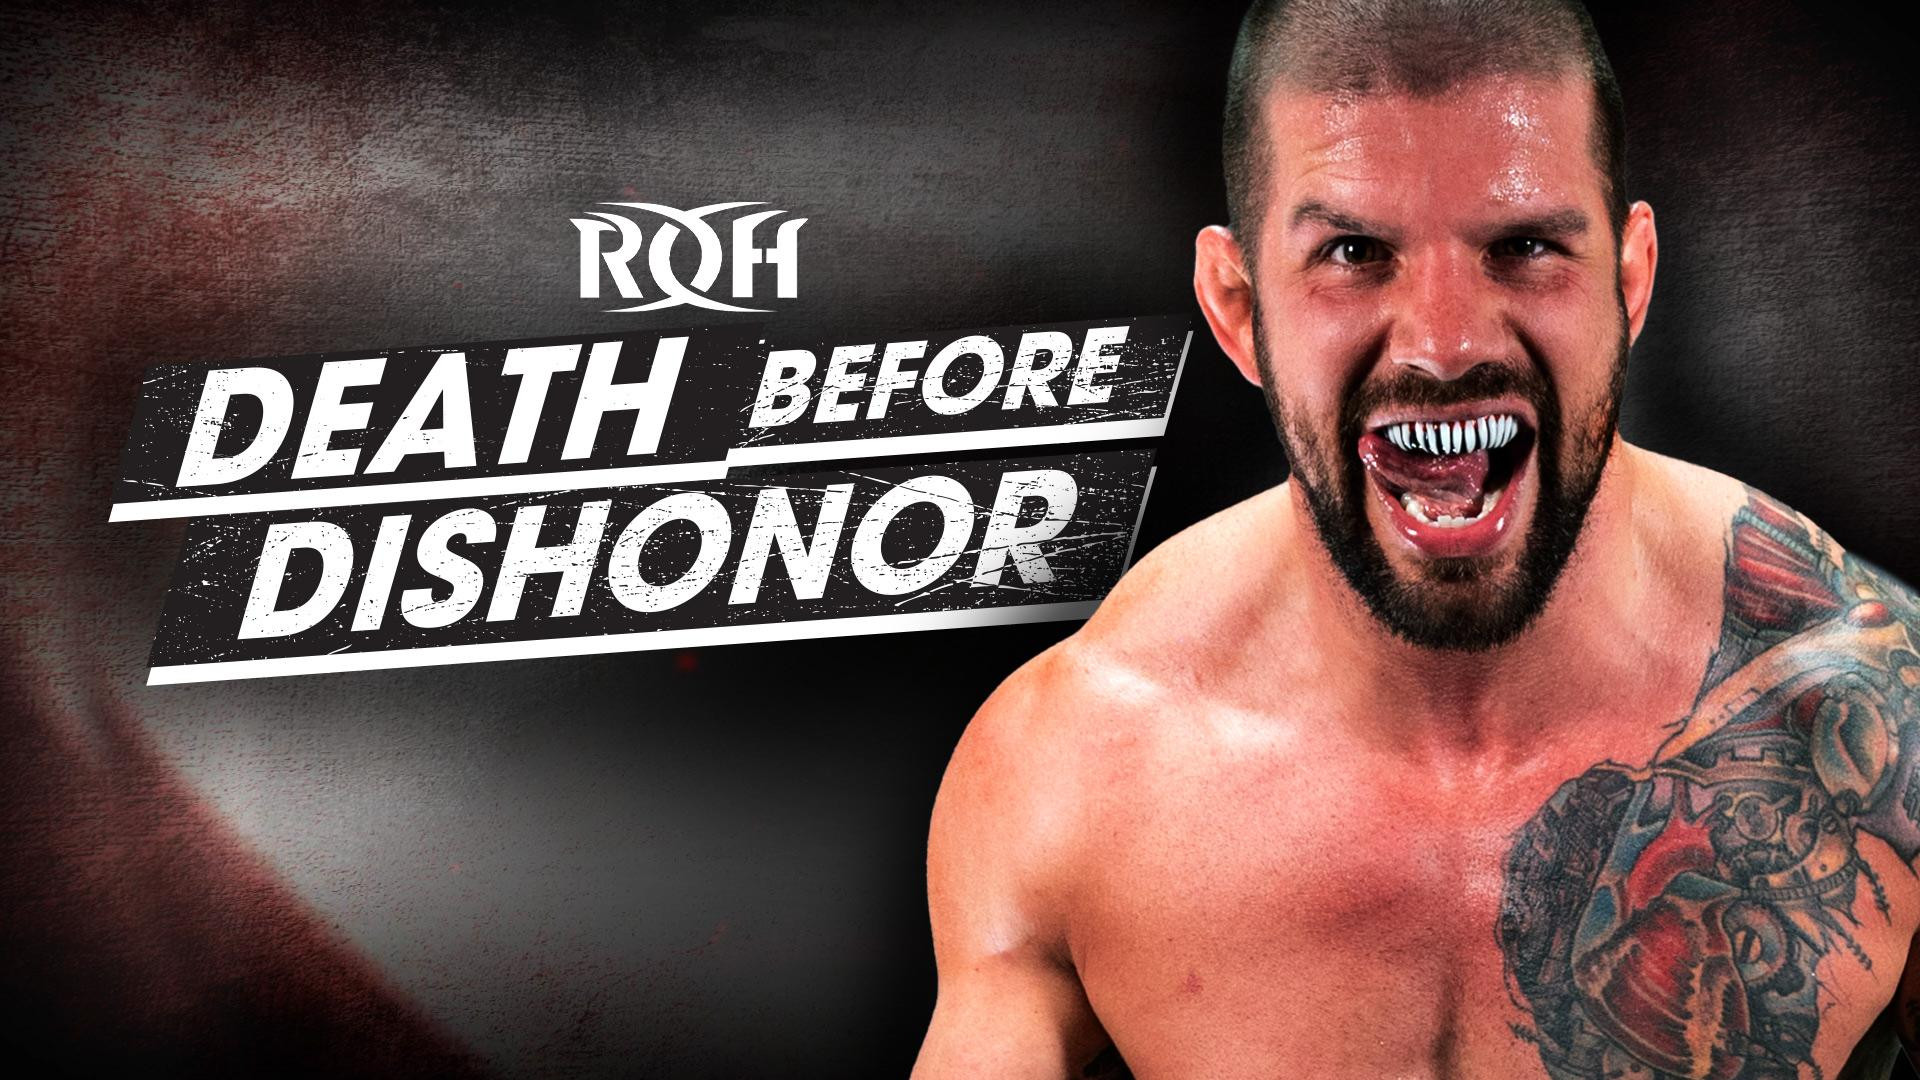 Roh Pure Championship Match Announced For Roh Death Before Dishonor Fightful News 